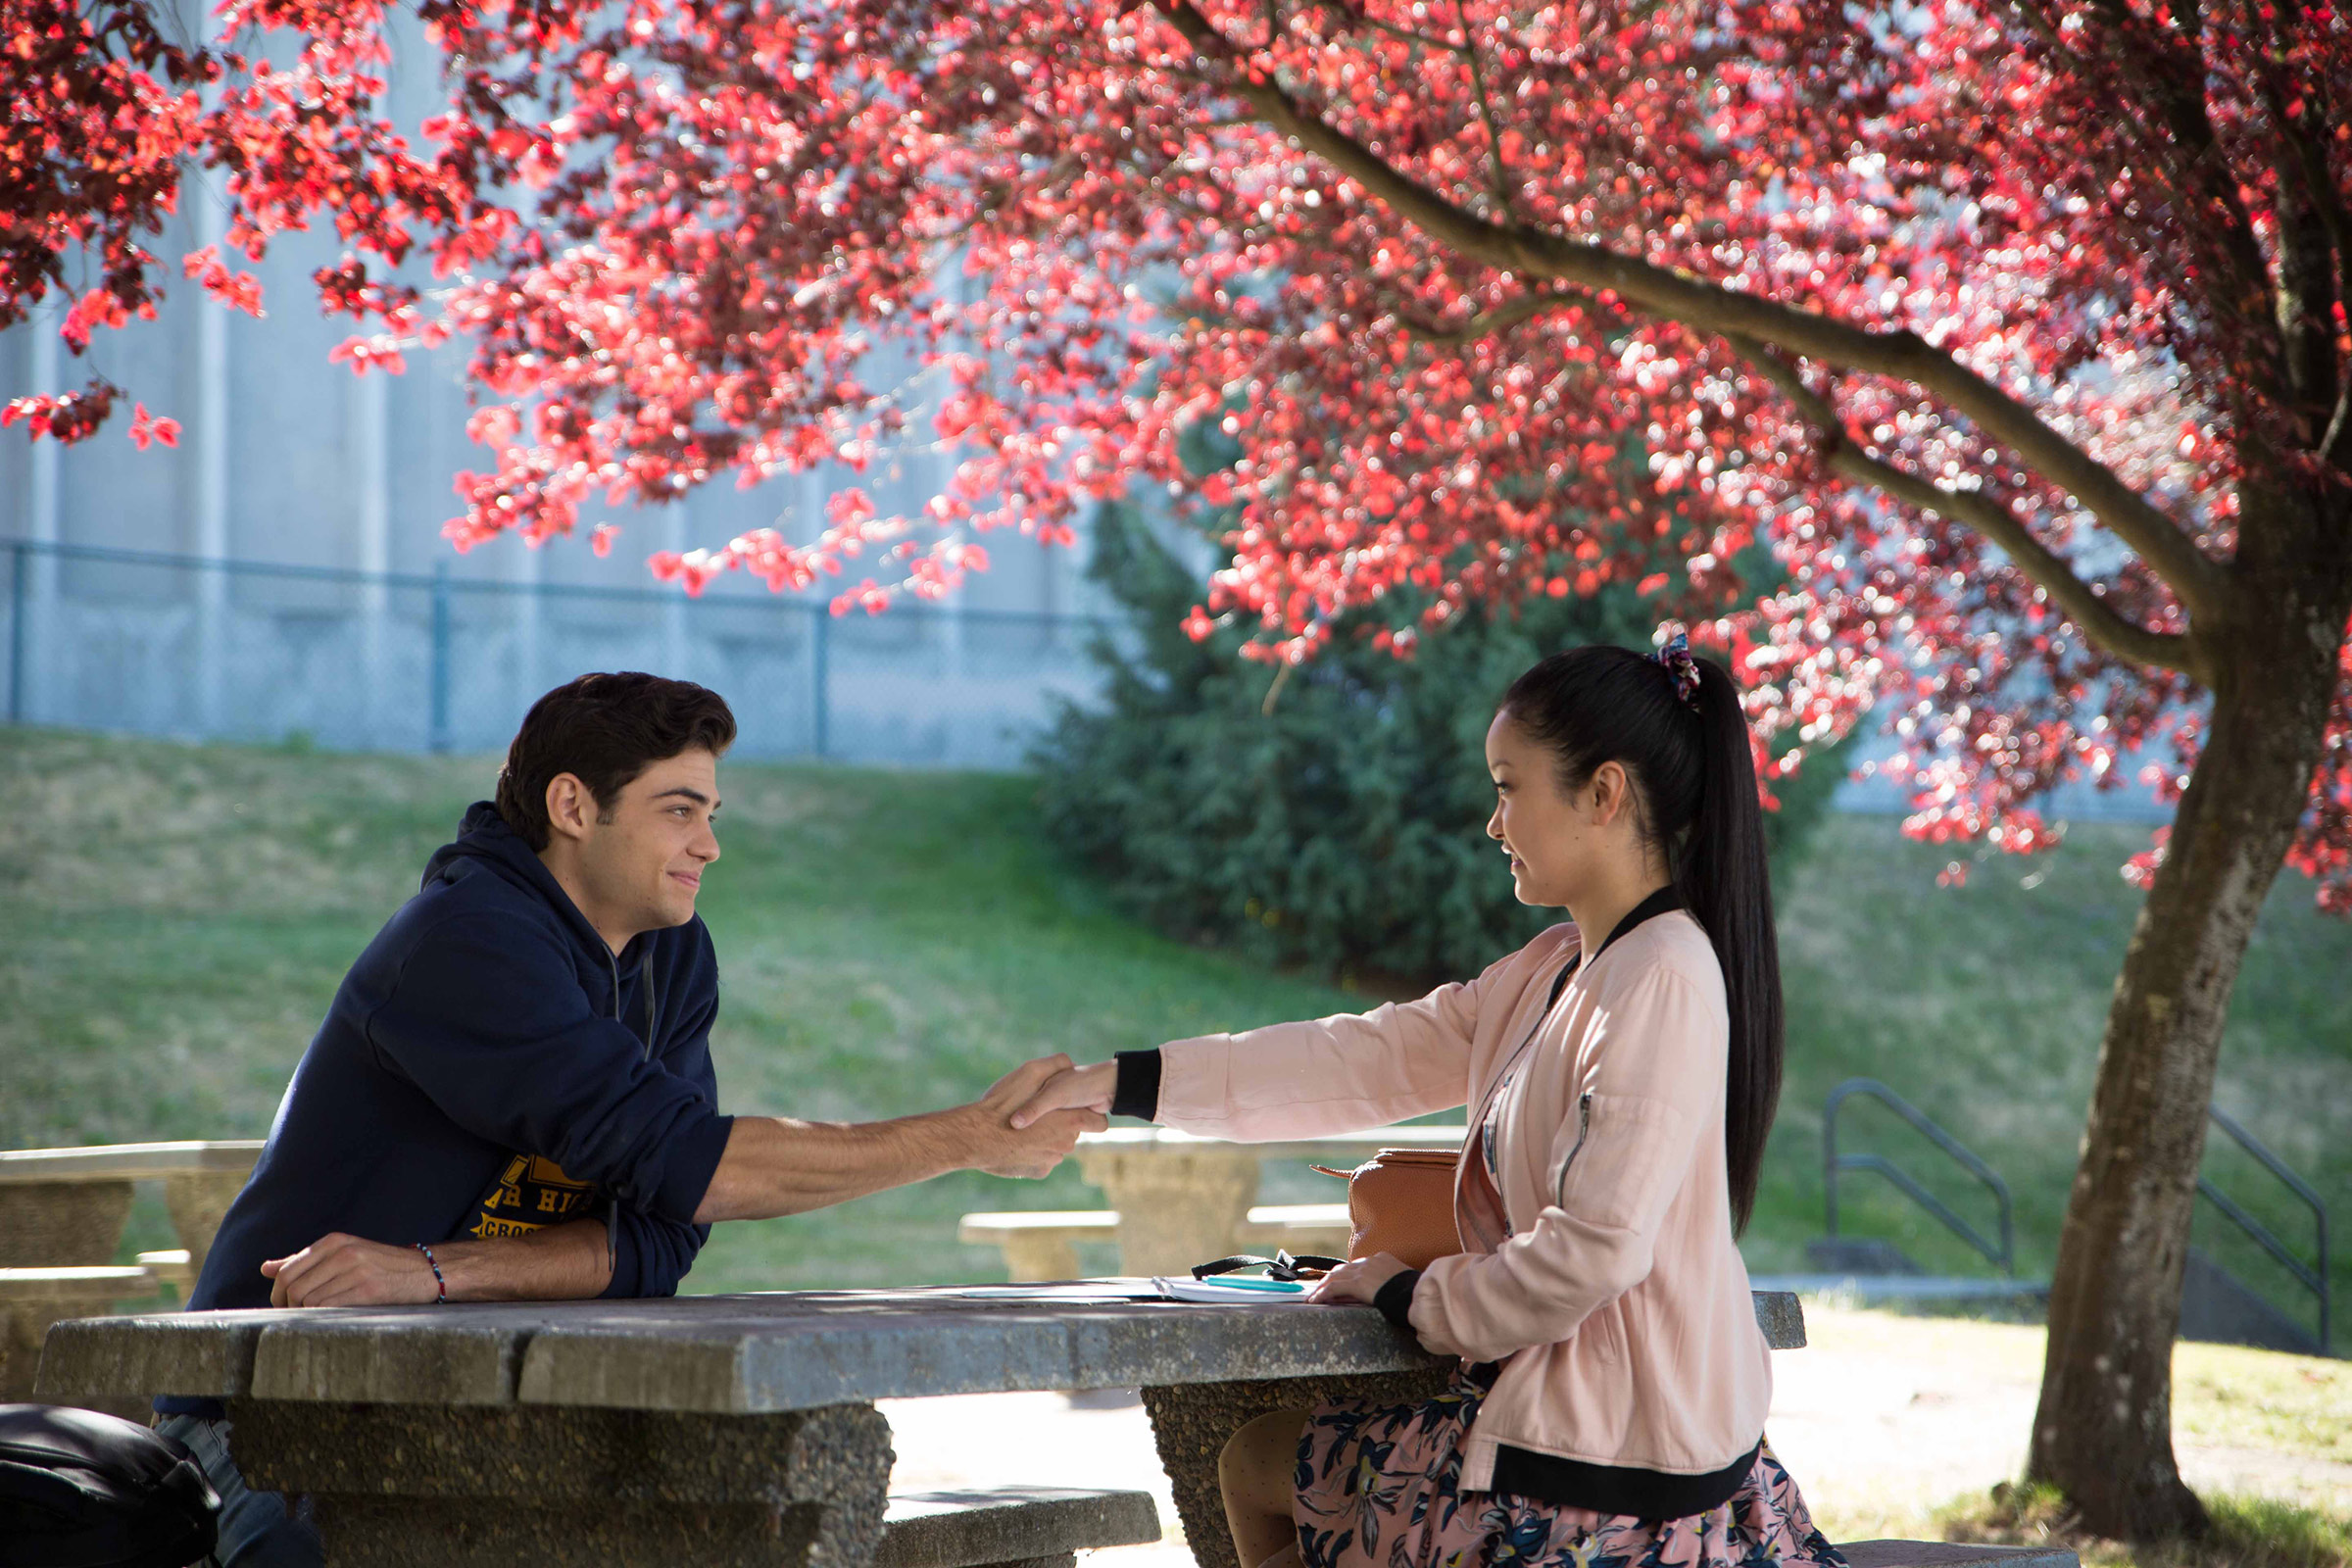 Noah Centineo, left, and Lana Condor in To All the Boys I’ve Loved Before.